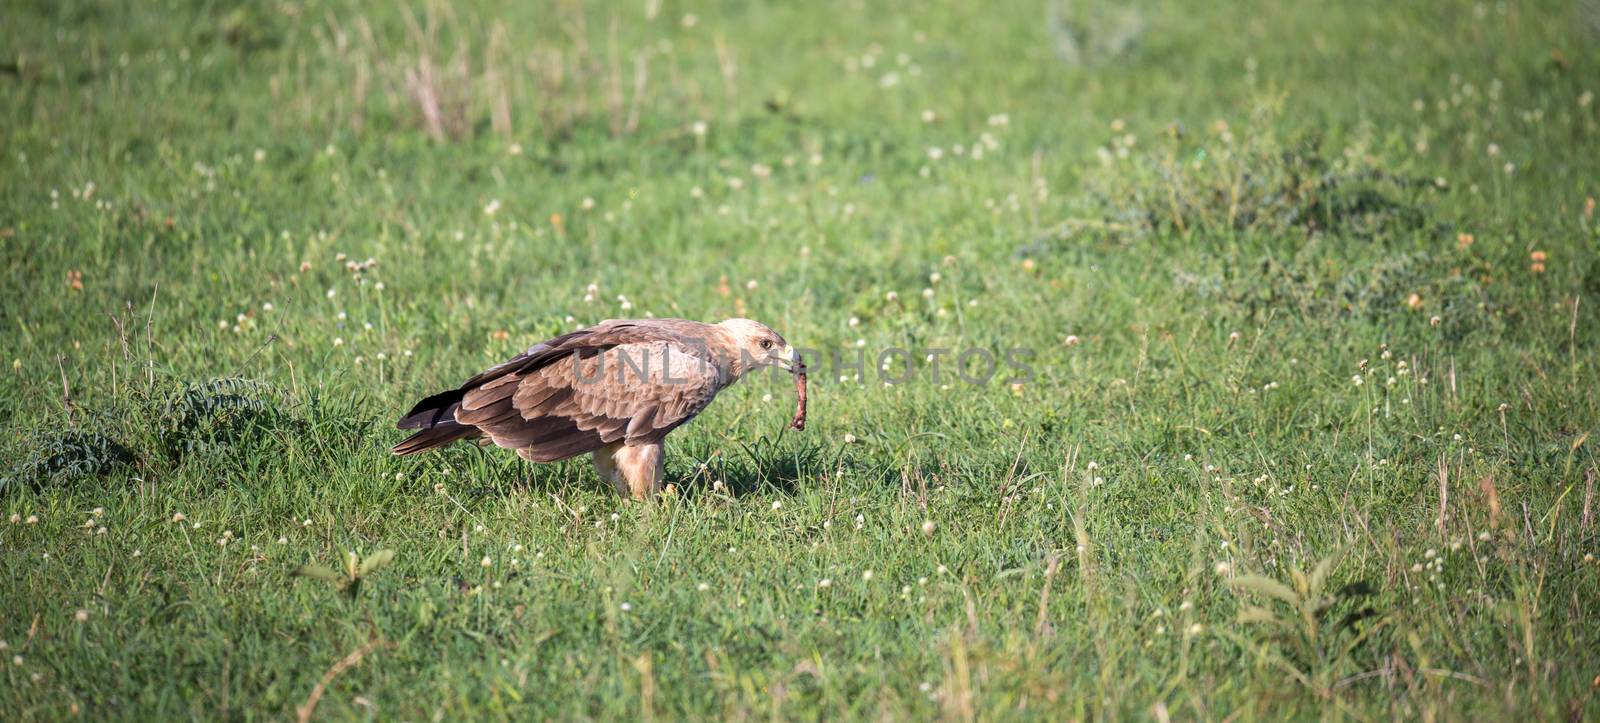 An eagle in the middle of the grassland in a meadow by 25ehaag6